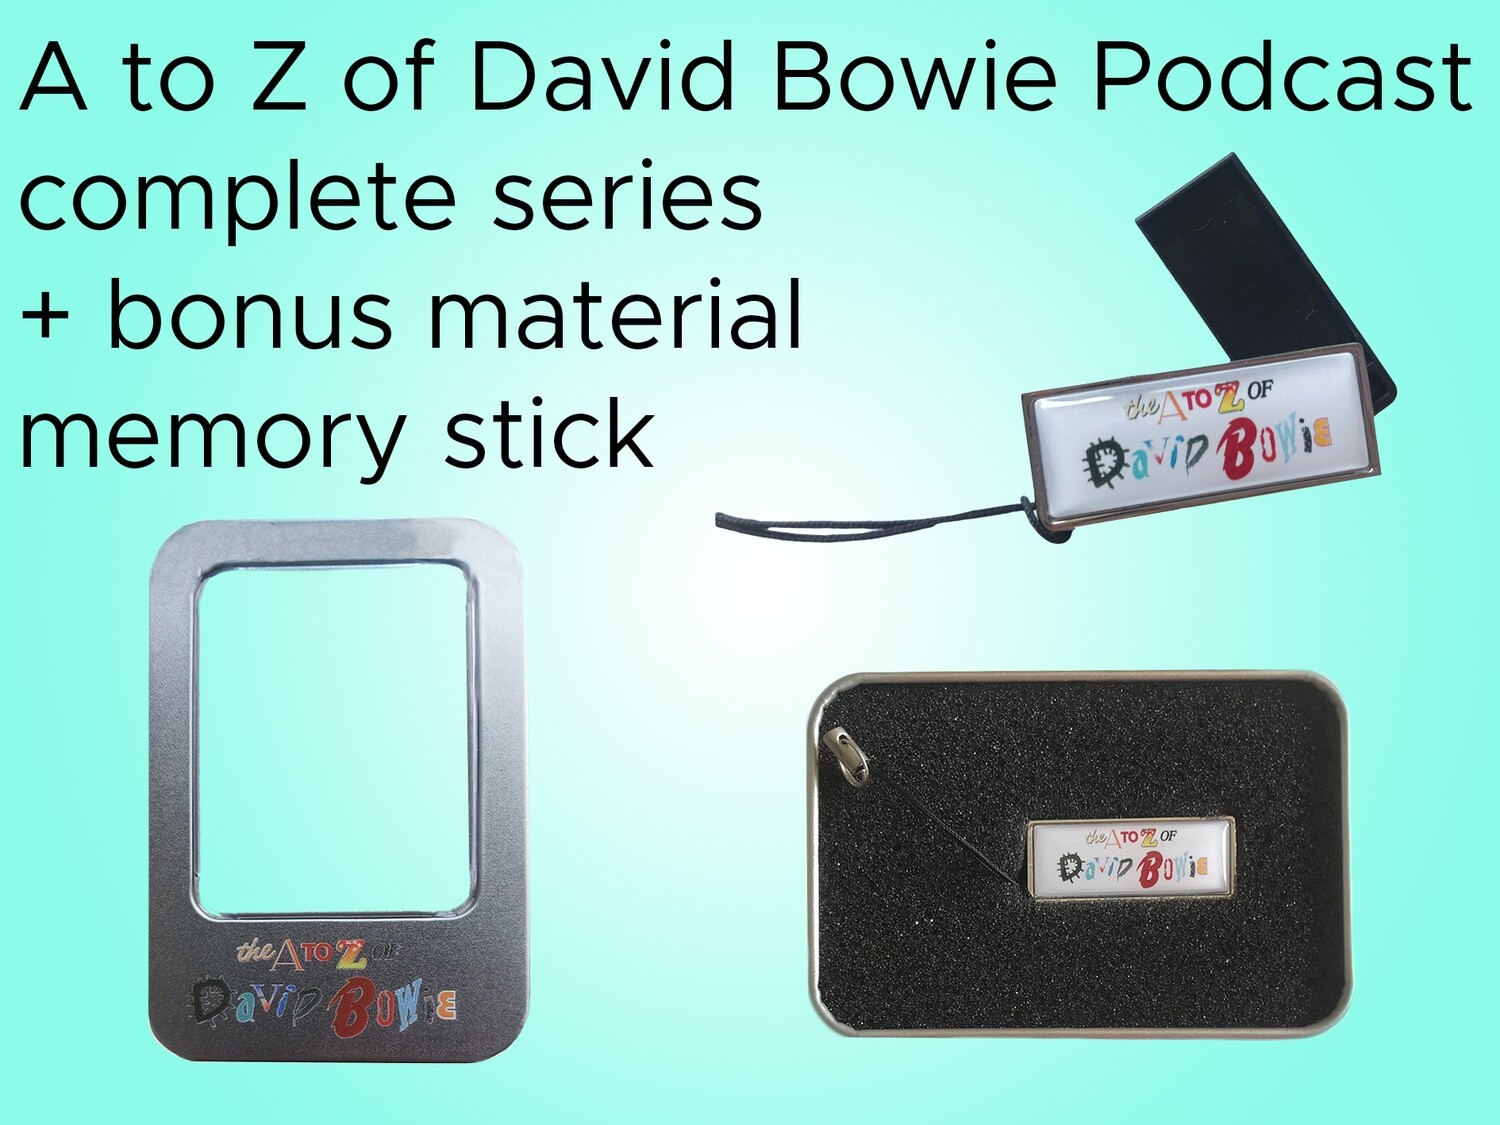 A to Z of David Bowie Podcast